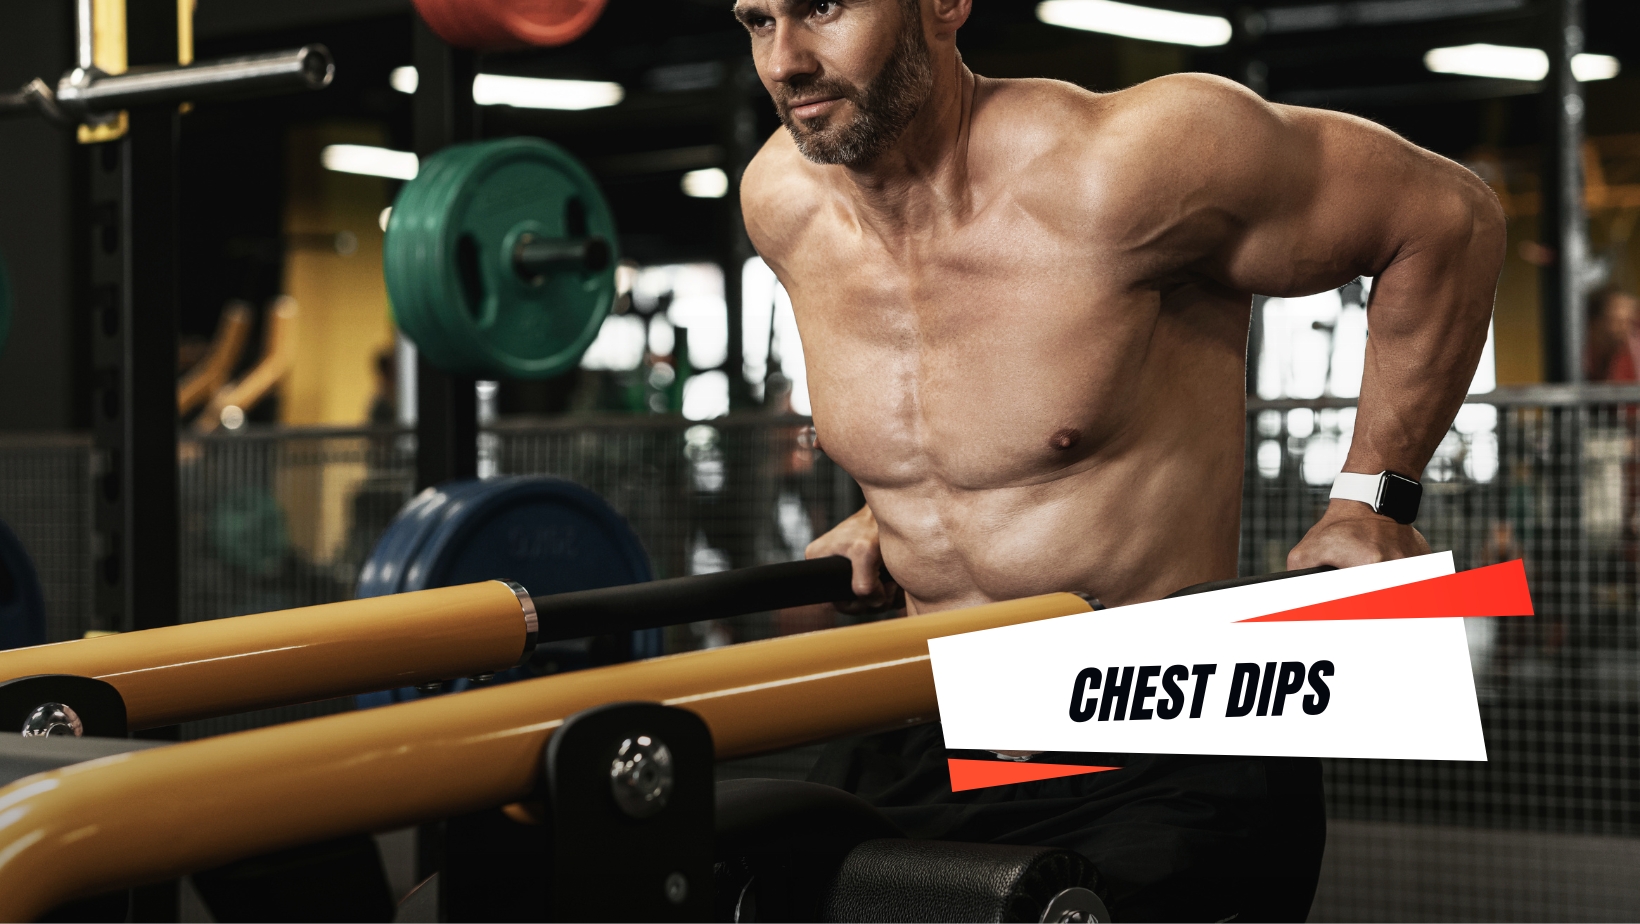 men performing chest dips workout